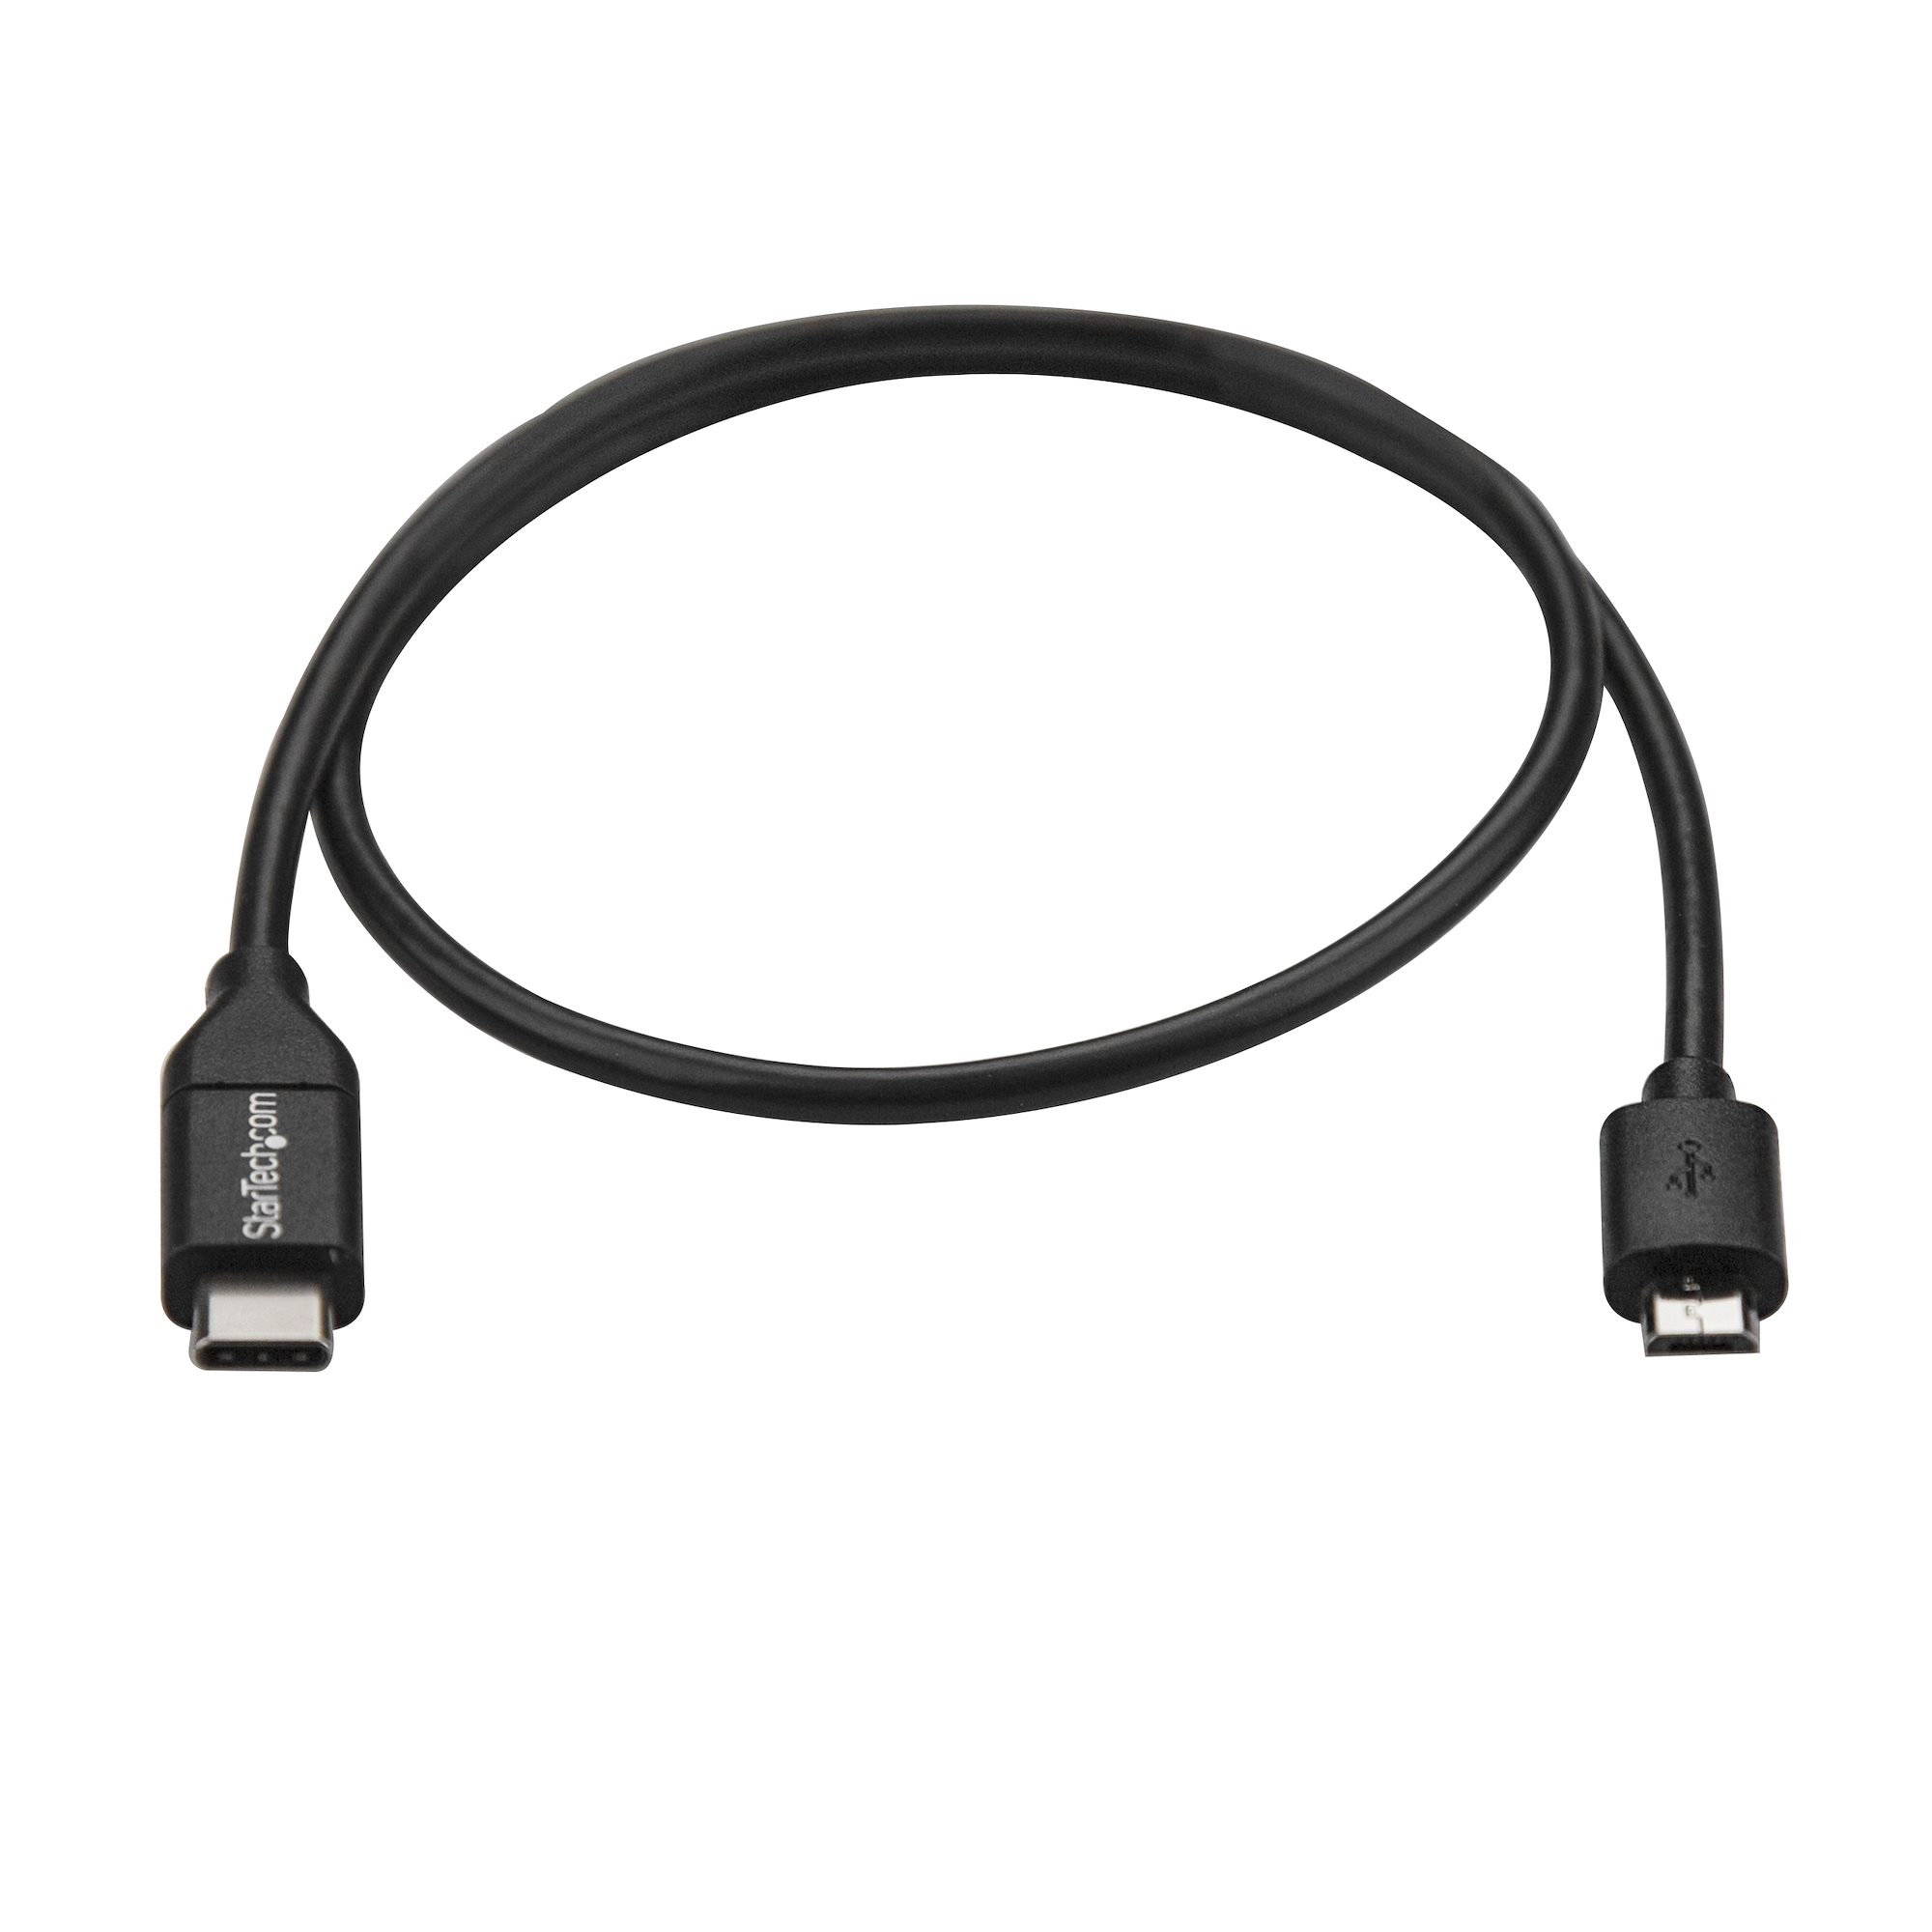 USB-C to micro USB OTG Host cable